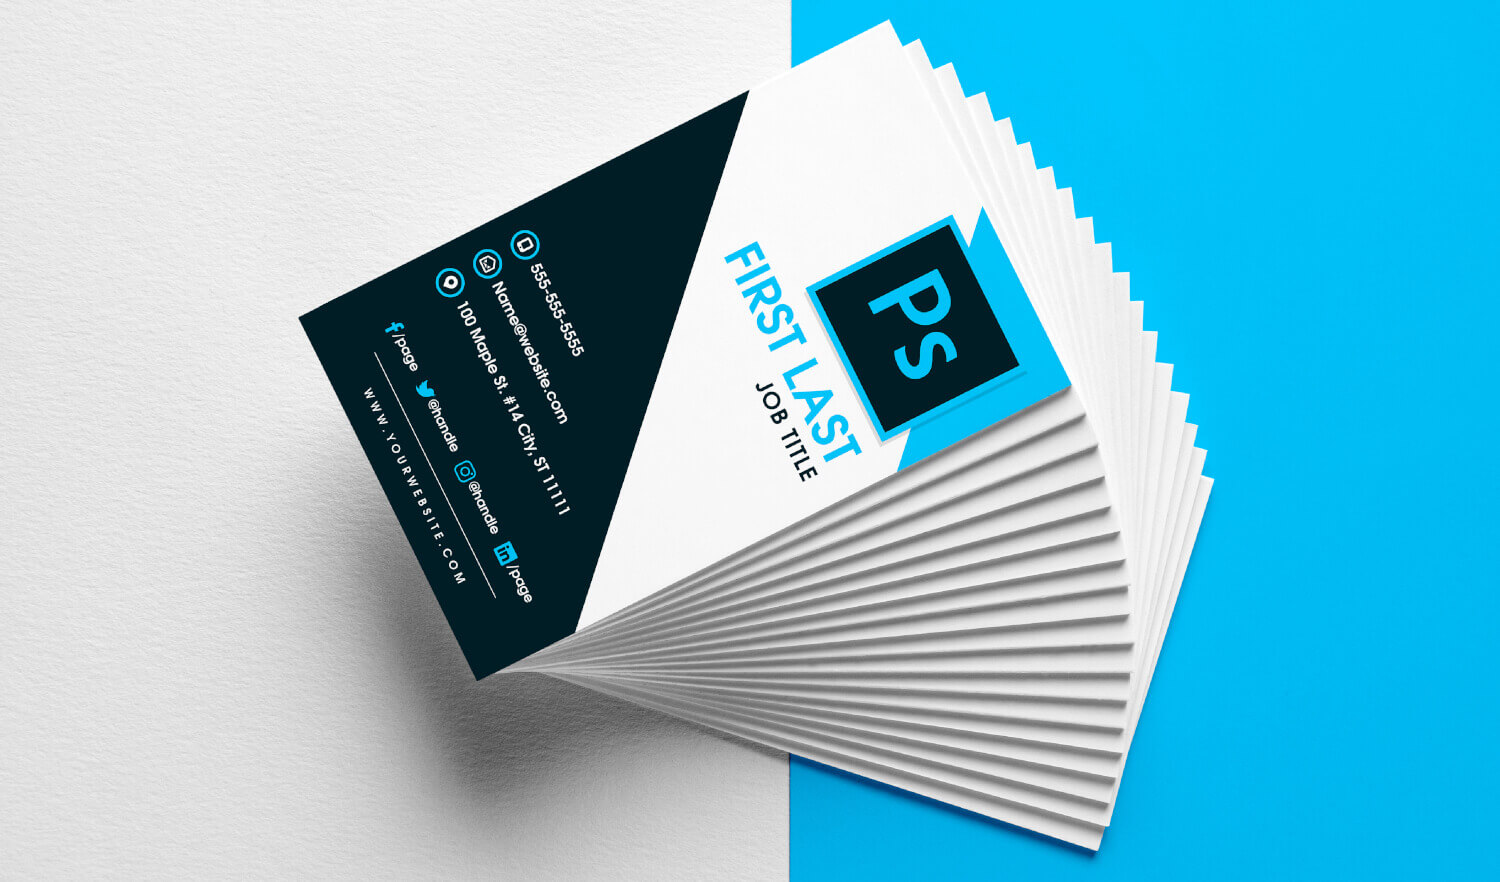 Free Vertical Business Card Template In Psd Format Pertaining To Free Business Card Templates In Psd Format